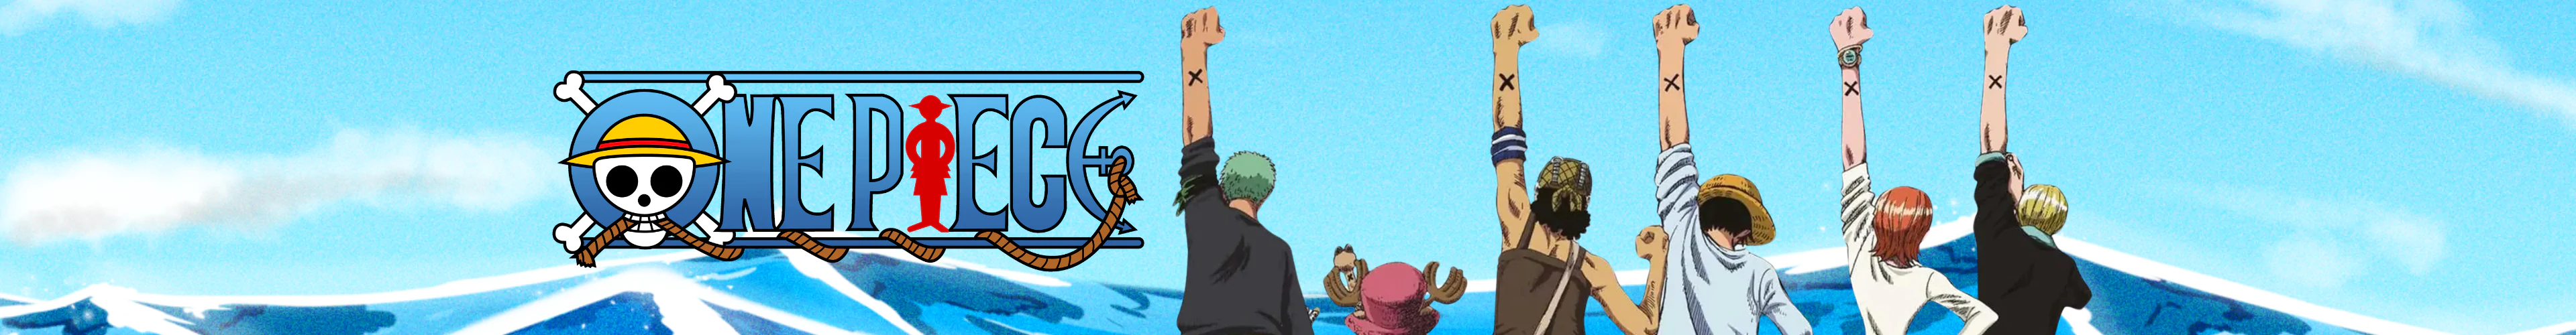 One Piece plushes banner